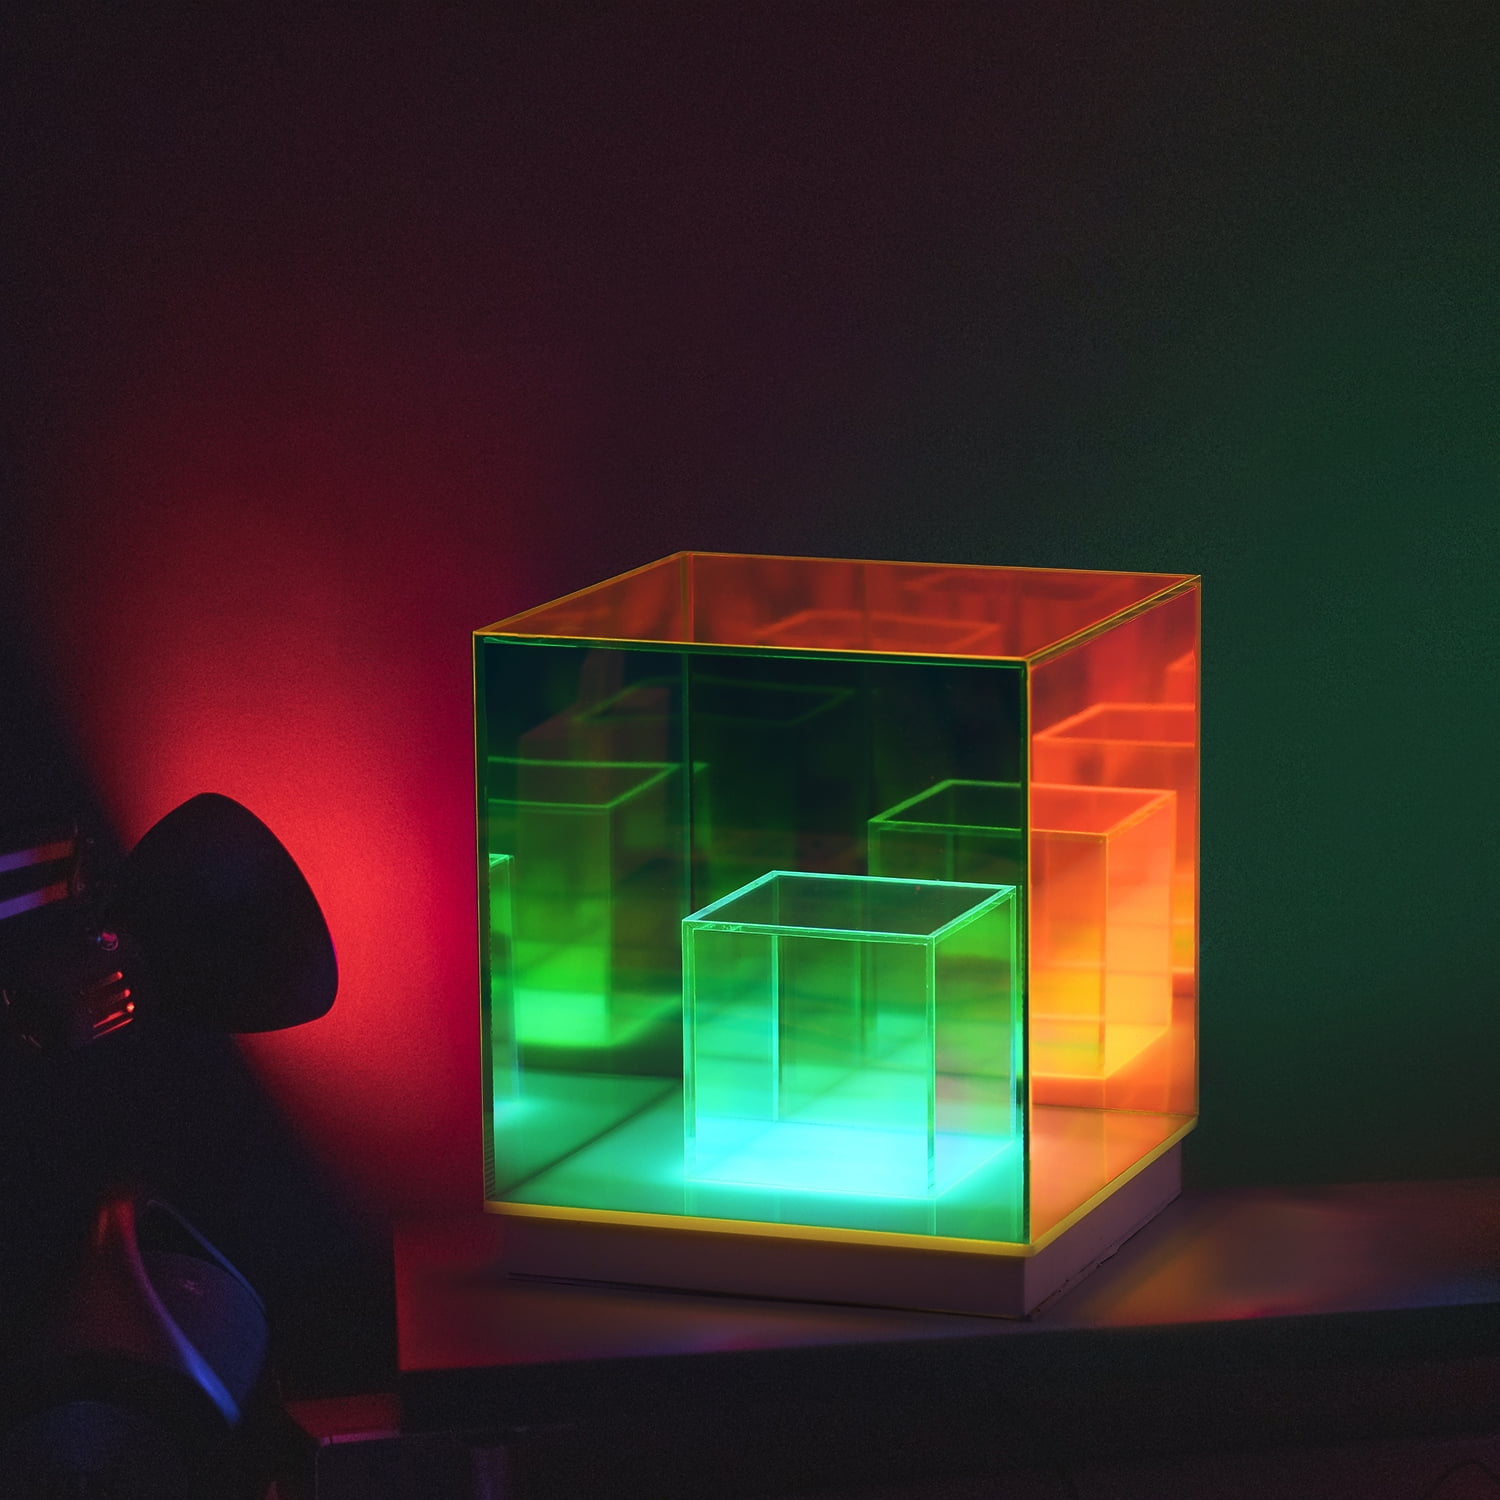 Infinity Cube Lamp: Endless Multicolored Reflections